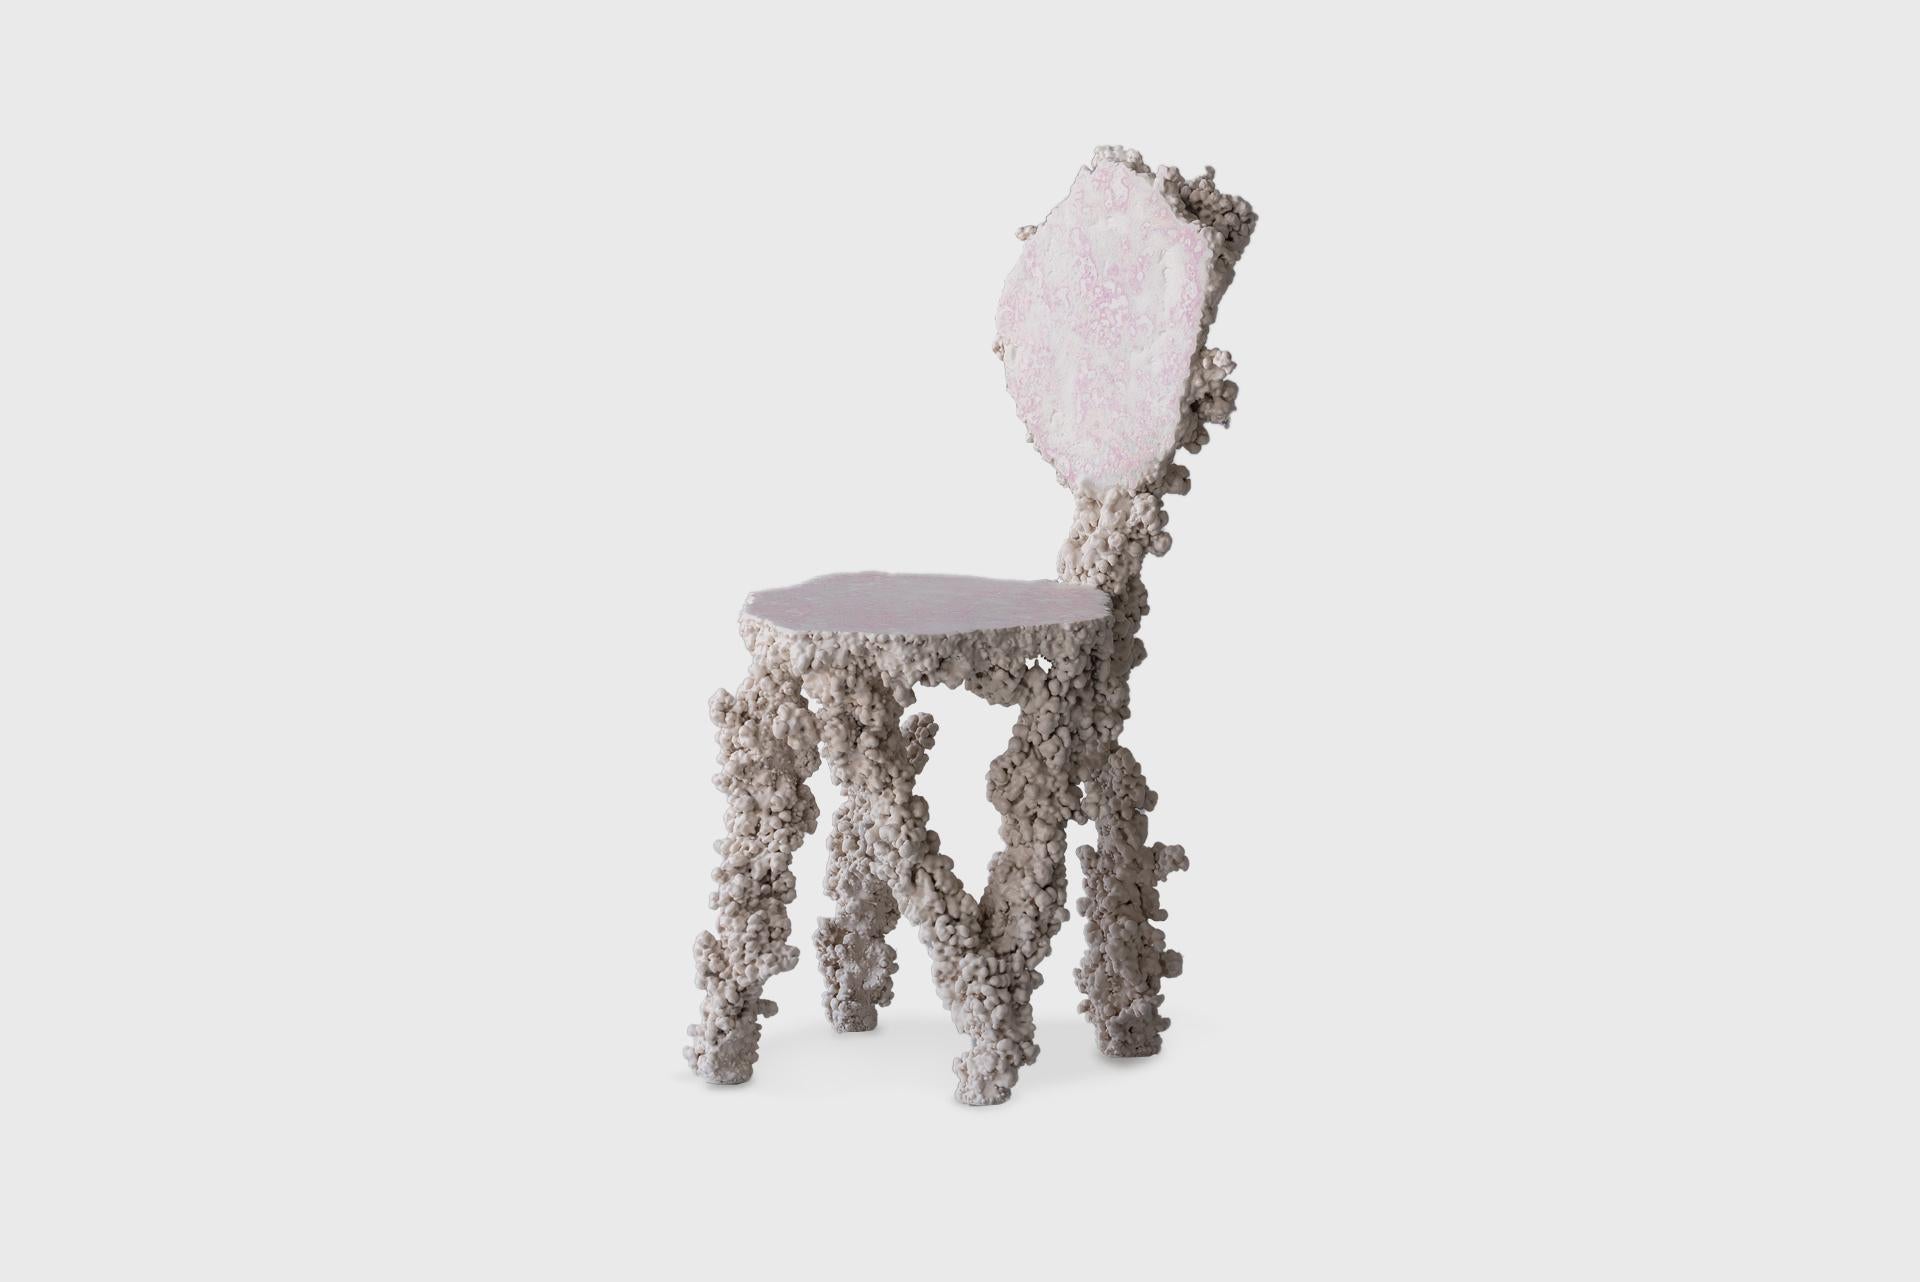 French Contemporary Chair Epimorph, Recycled Aluminium, Resin, Mineral, Elissa Lacoste For Sale